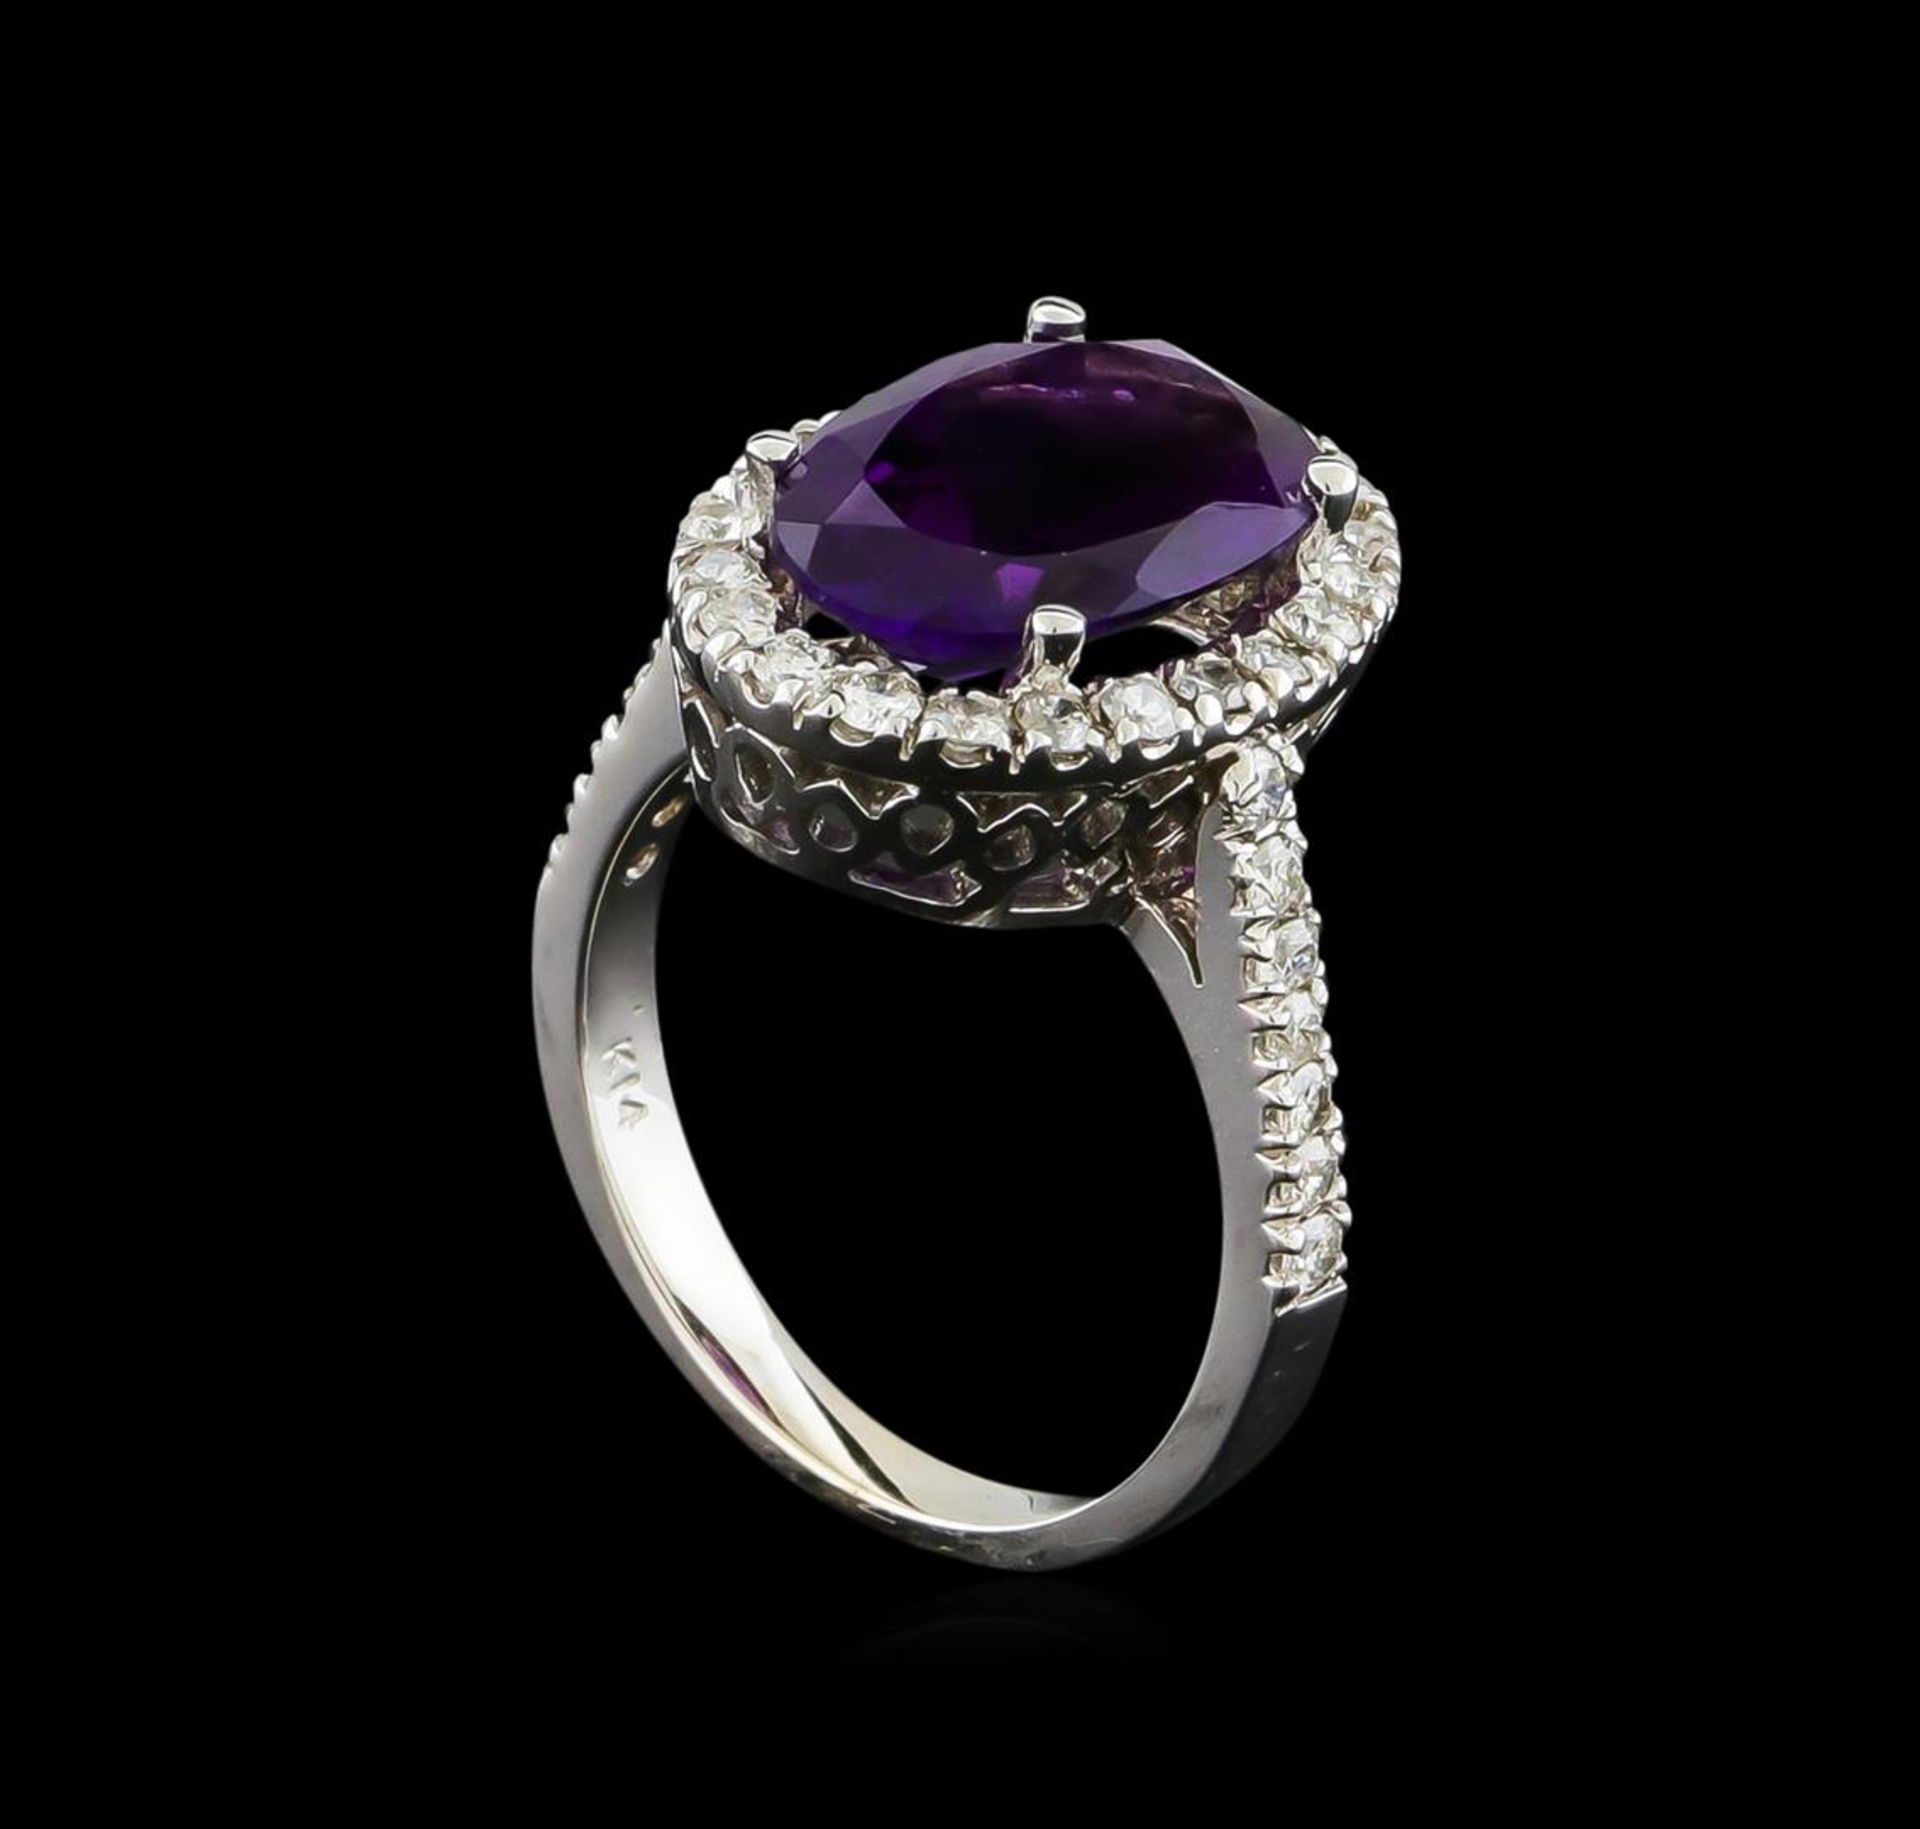 3.58ct Amethyst and Diamond Ring - 14KT White Gold - Image 4 of 4